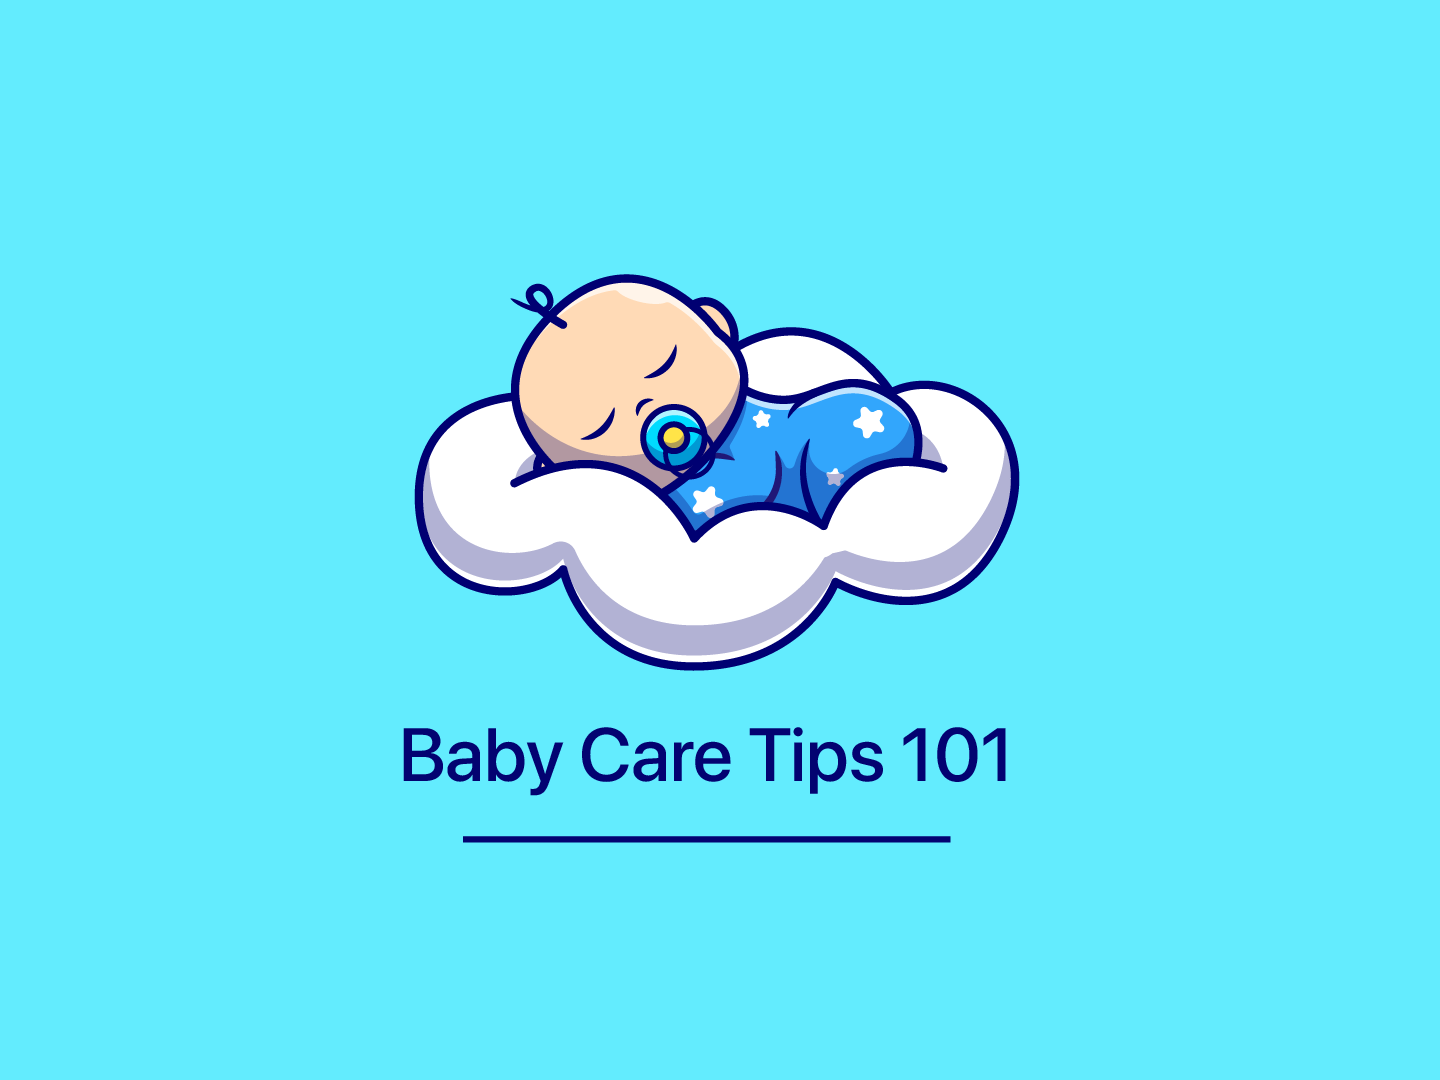 Baby Care Tips 101